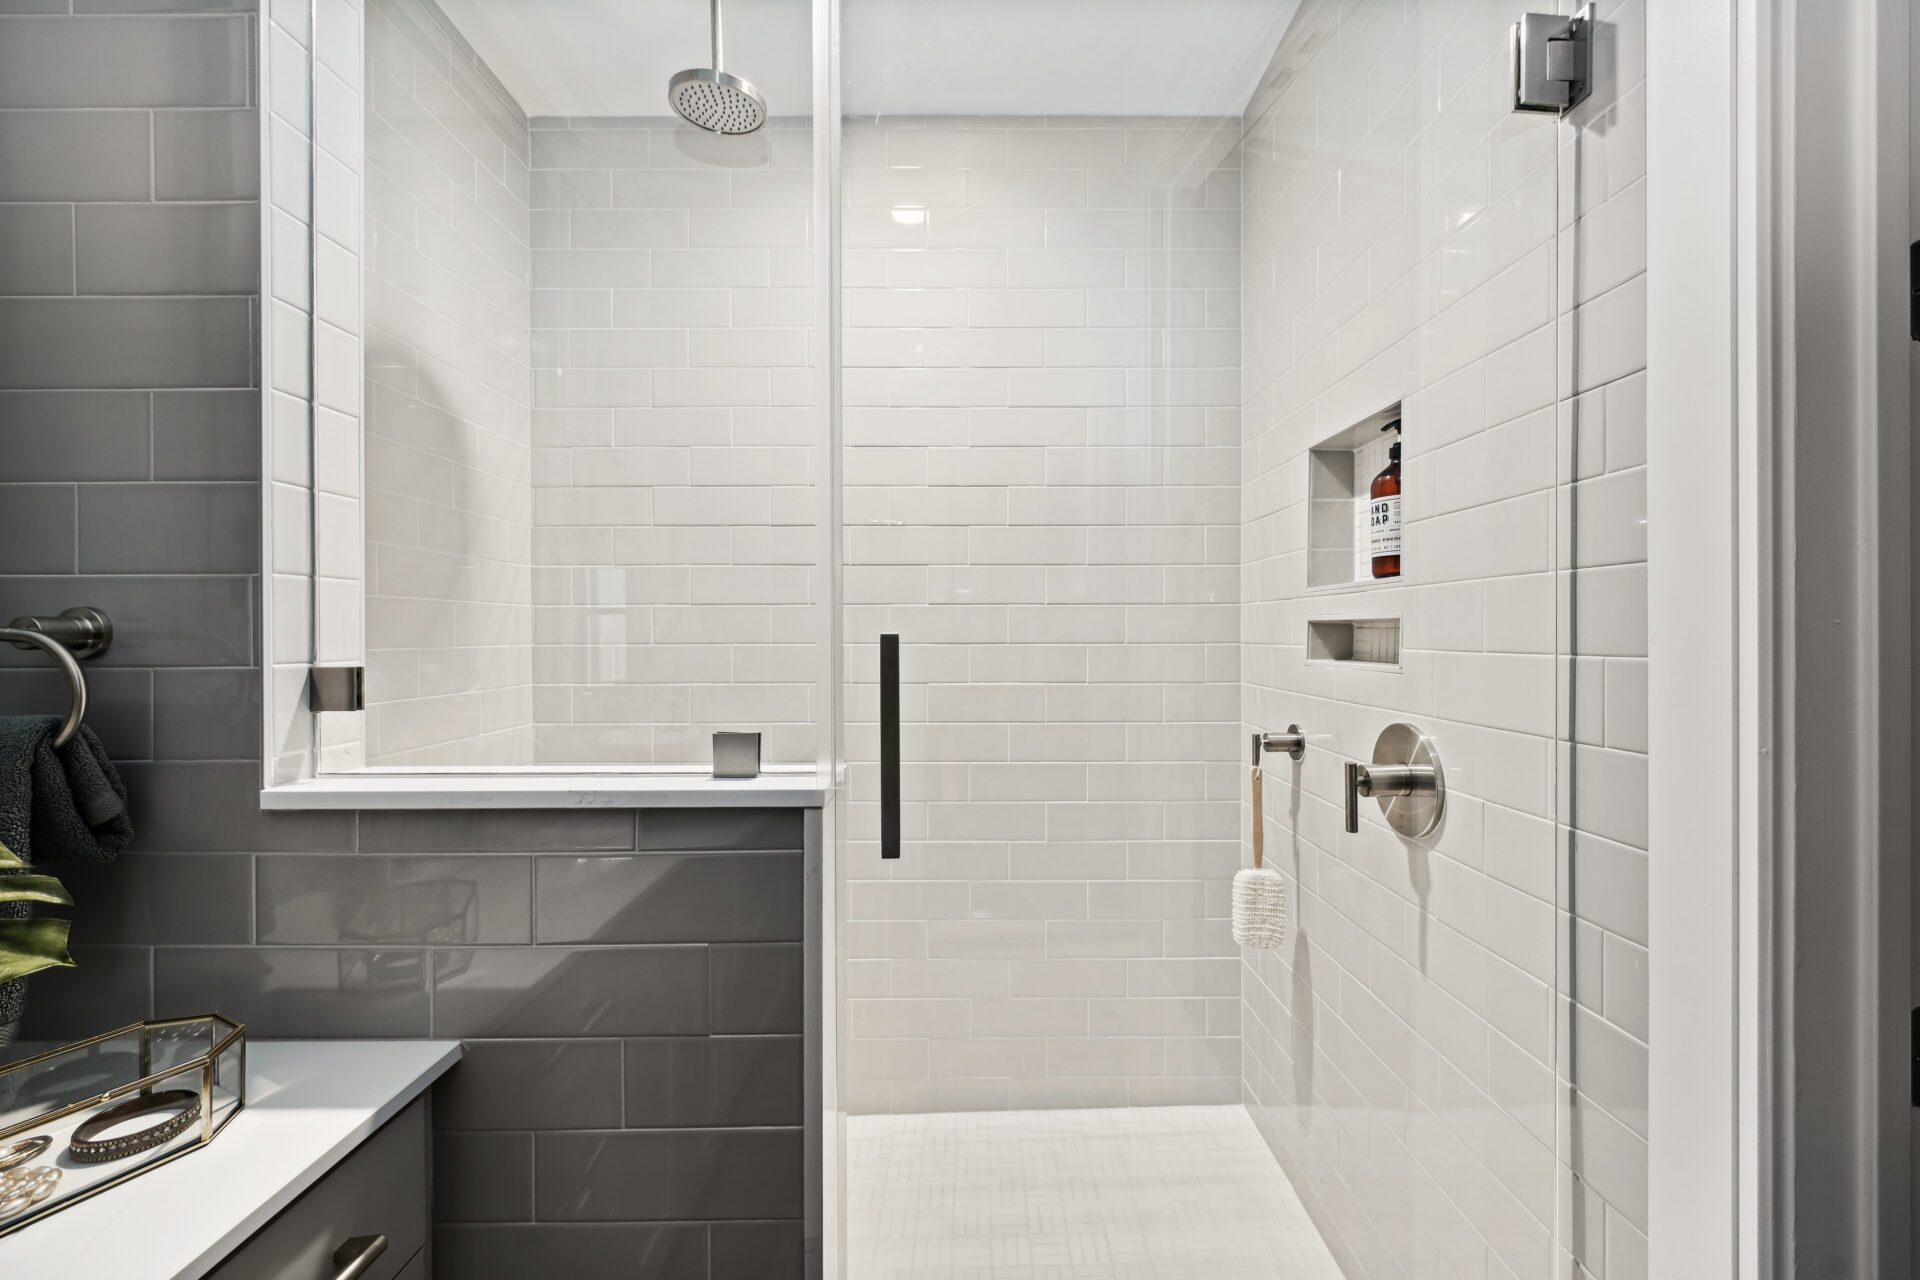 Interior view of a light grey tile shower with stainless steel overhead shower and glass door entryway